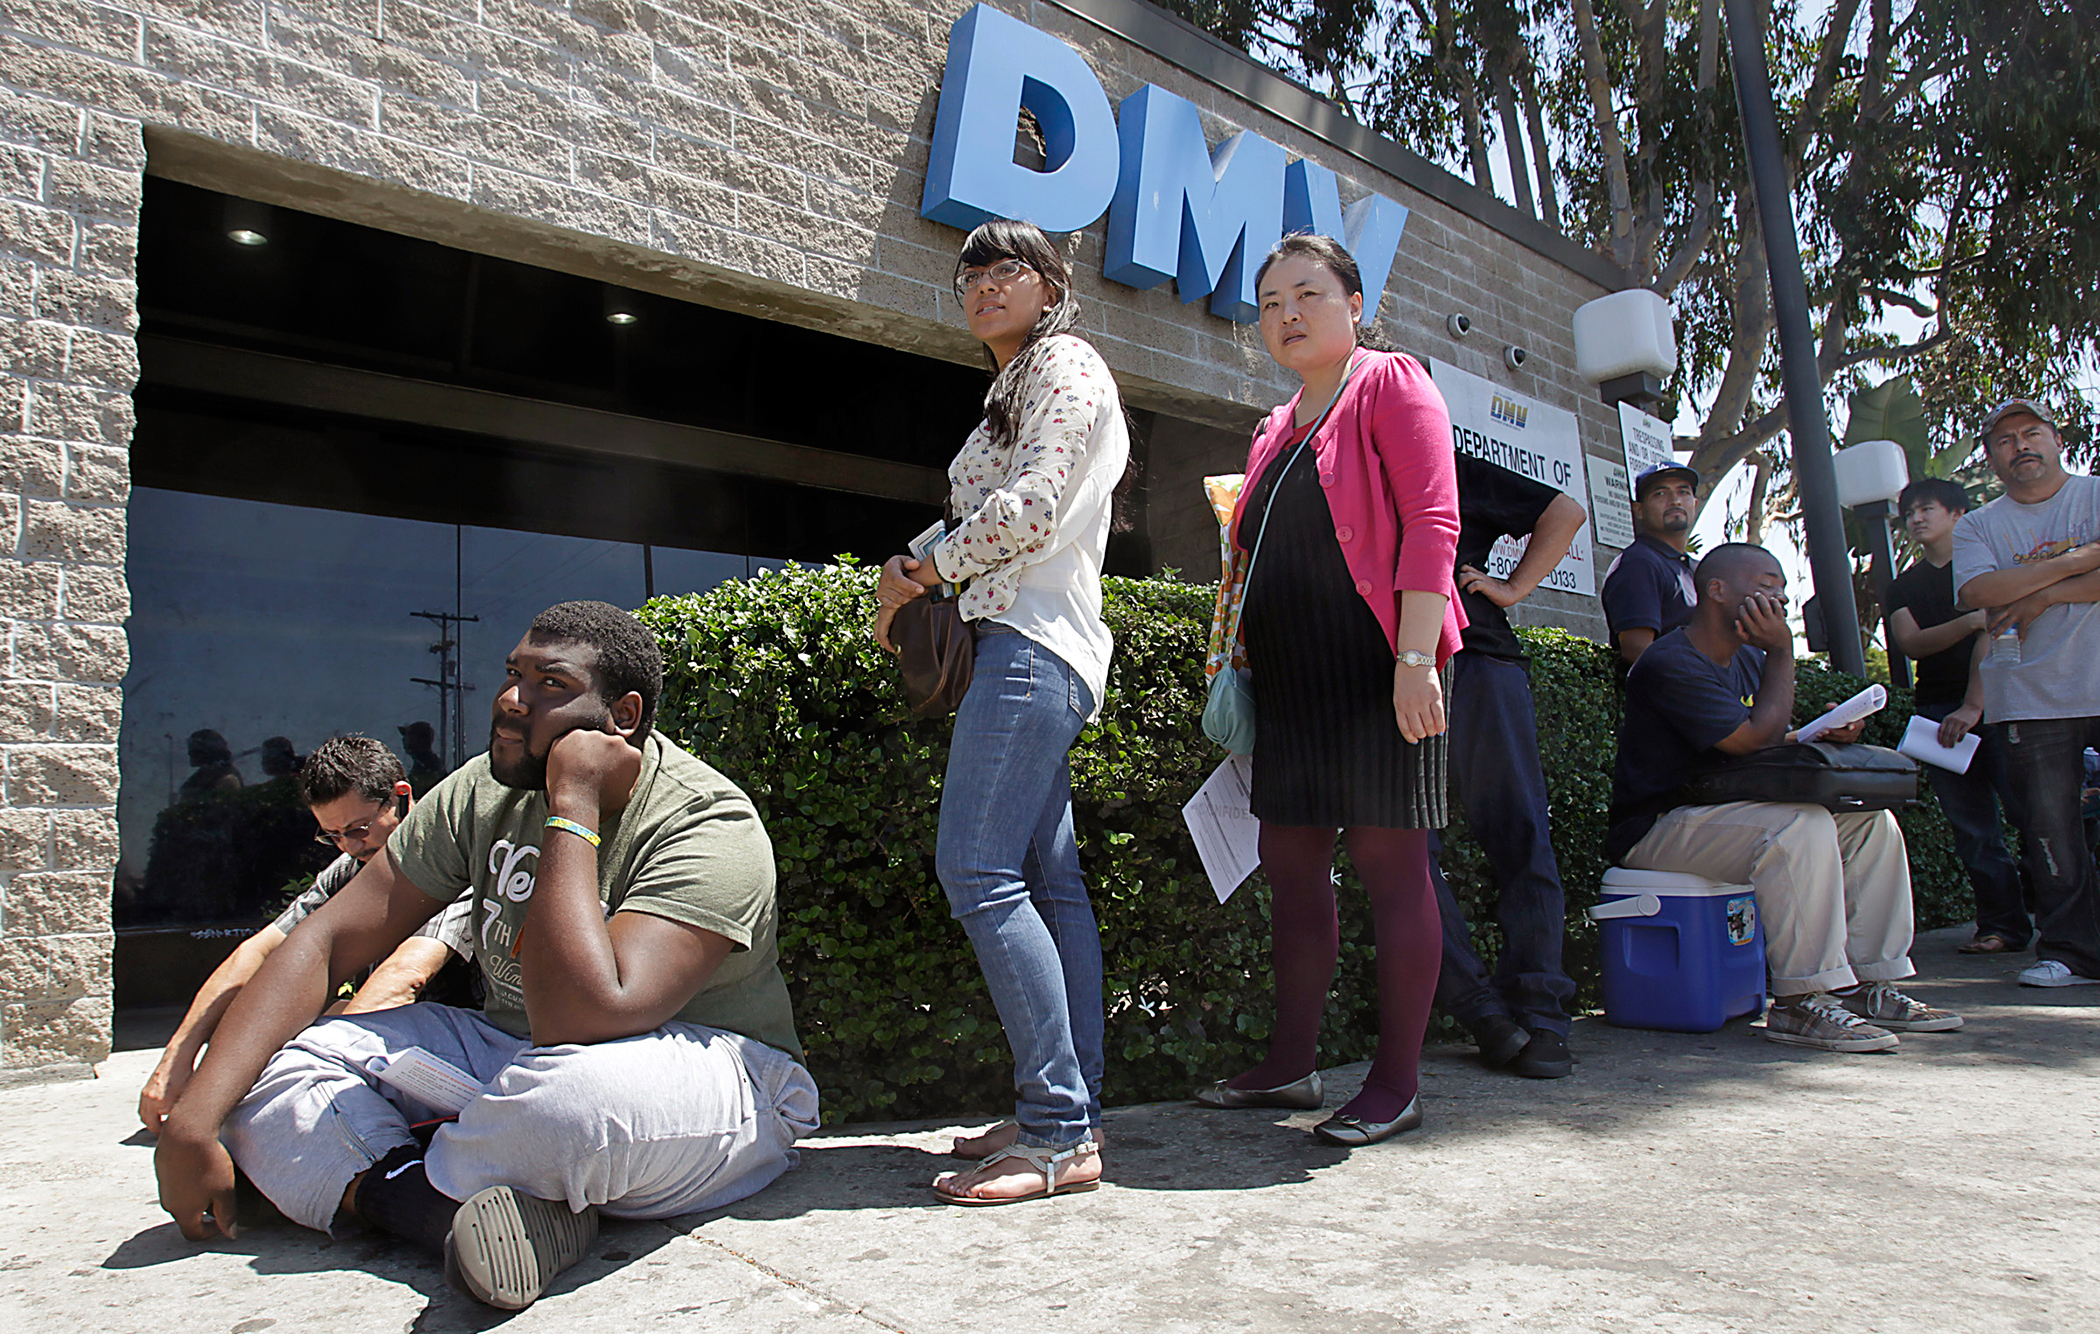 The line outside the DMV office in South Los Angeles is long on Tuesday, Aug. 14, 2012.